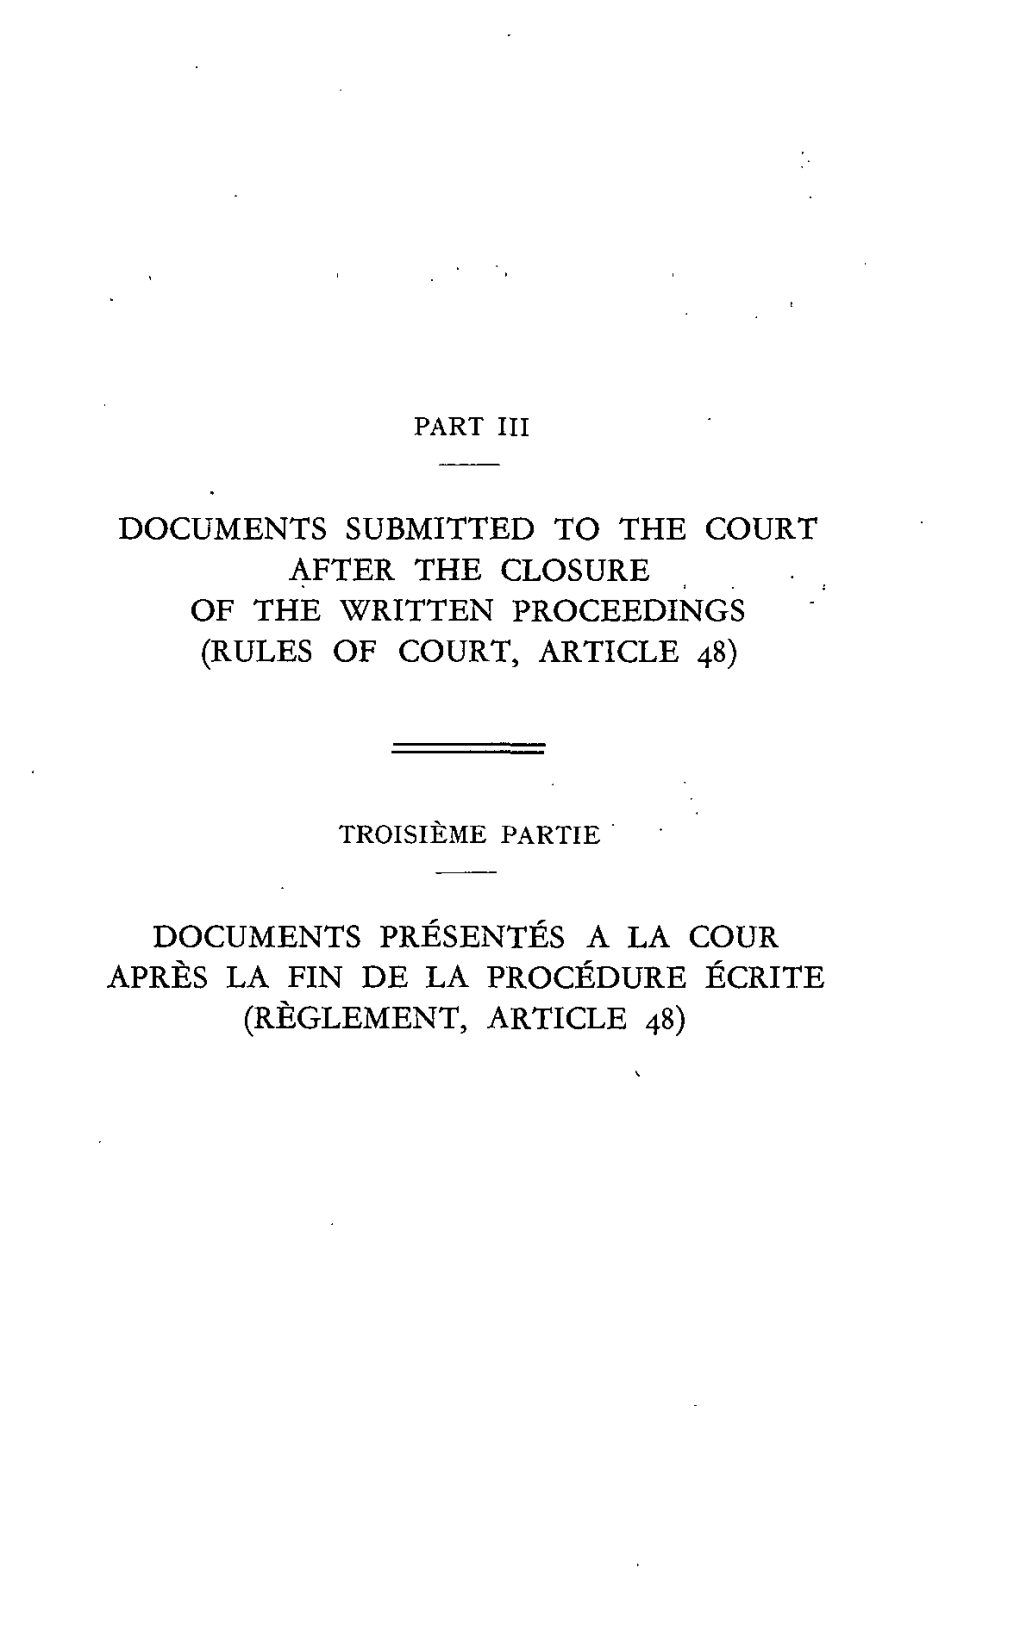 Documents Submitted to the Court After the Closure , of the Written Proceedings (Rules of Court, Article 48)